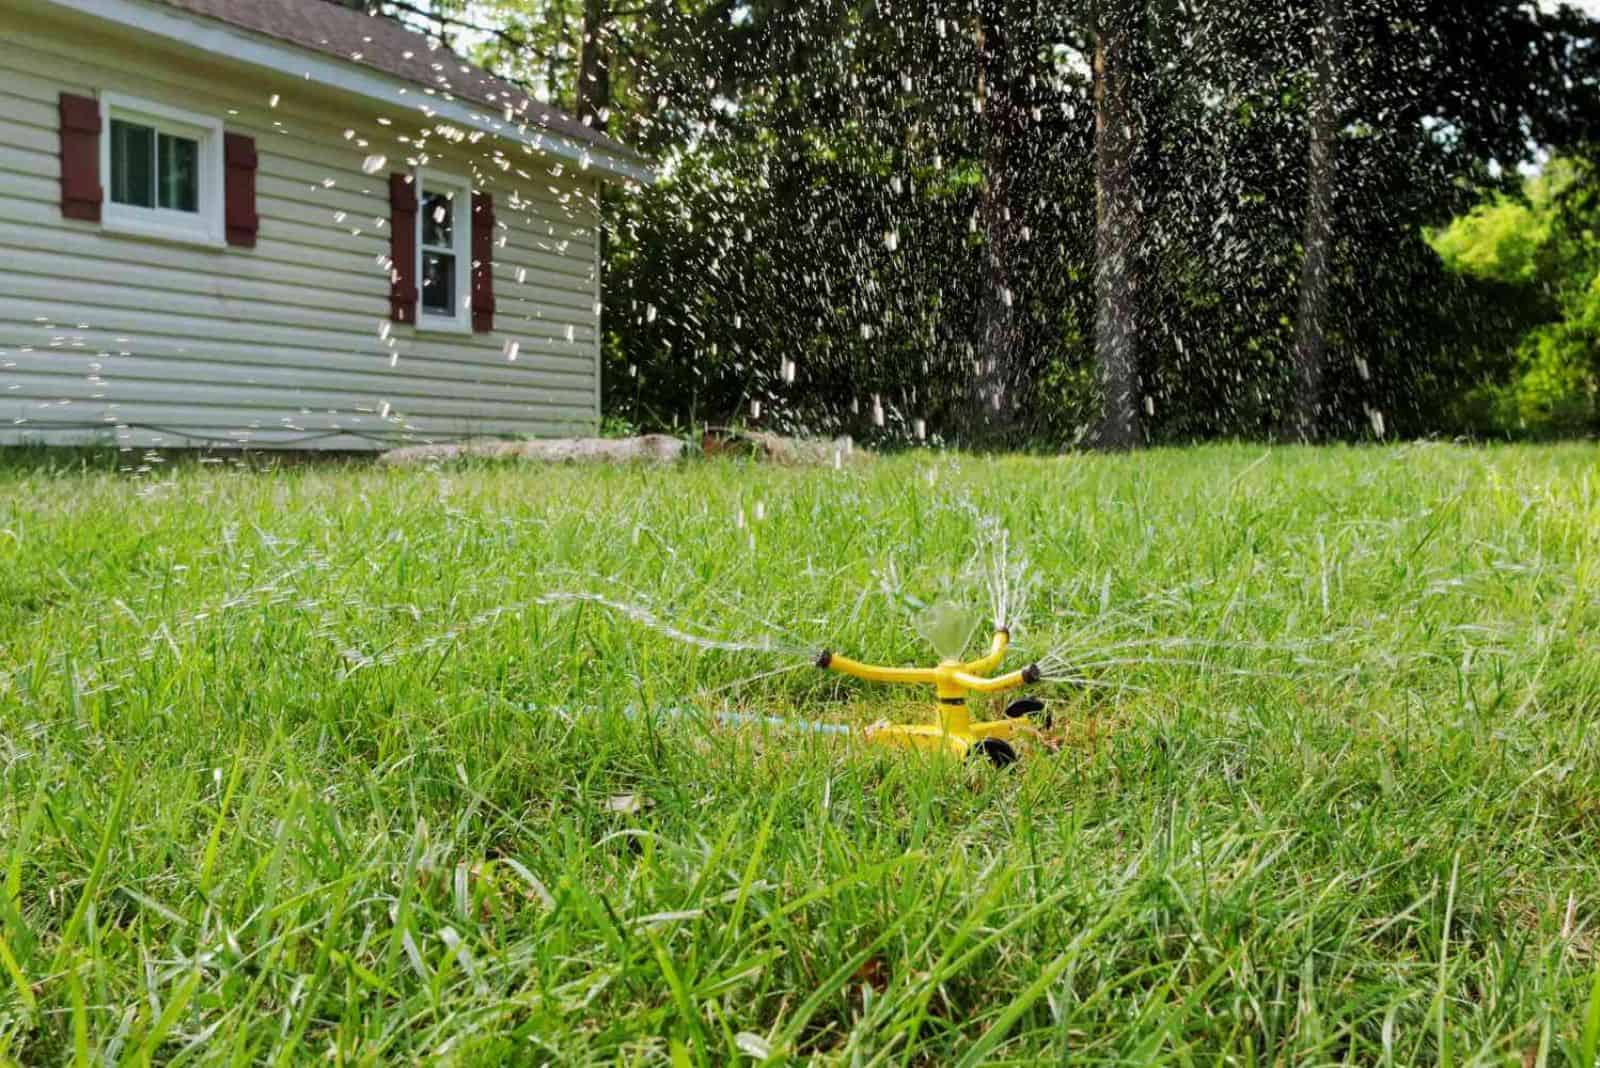 watering a bare lawn